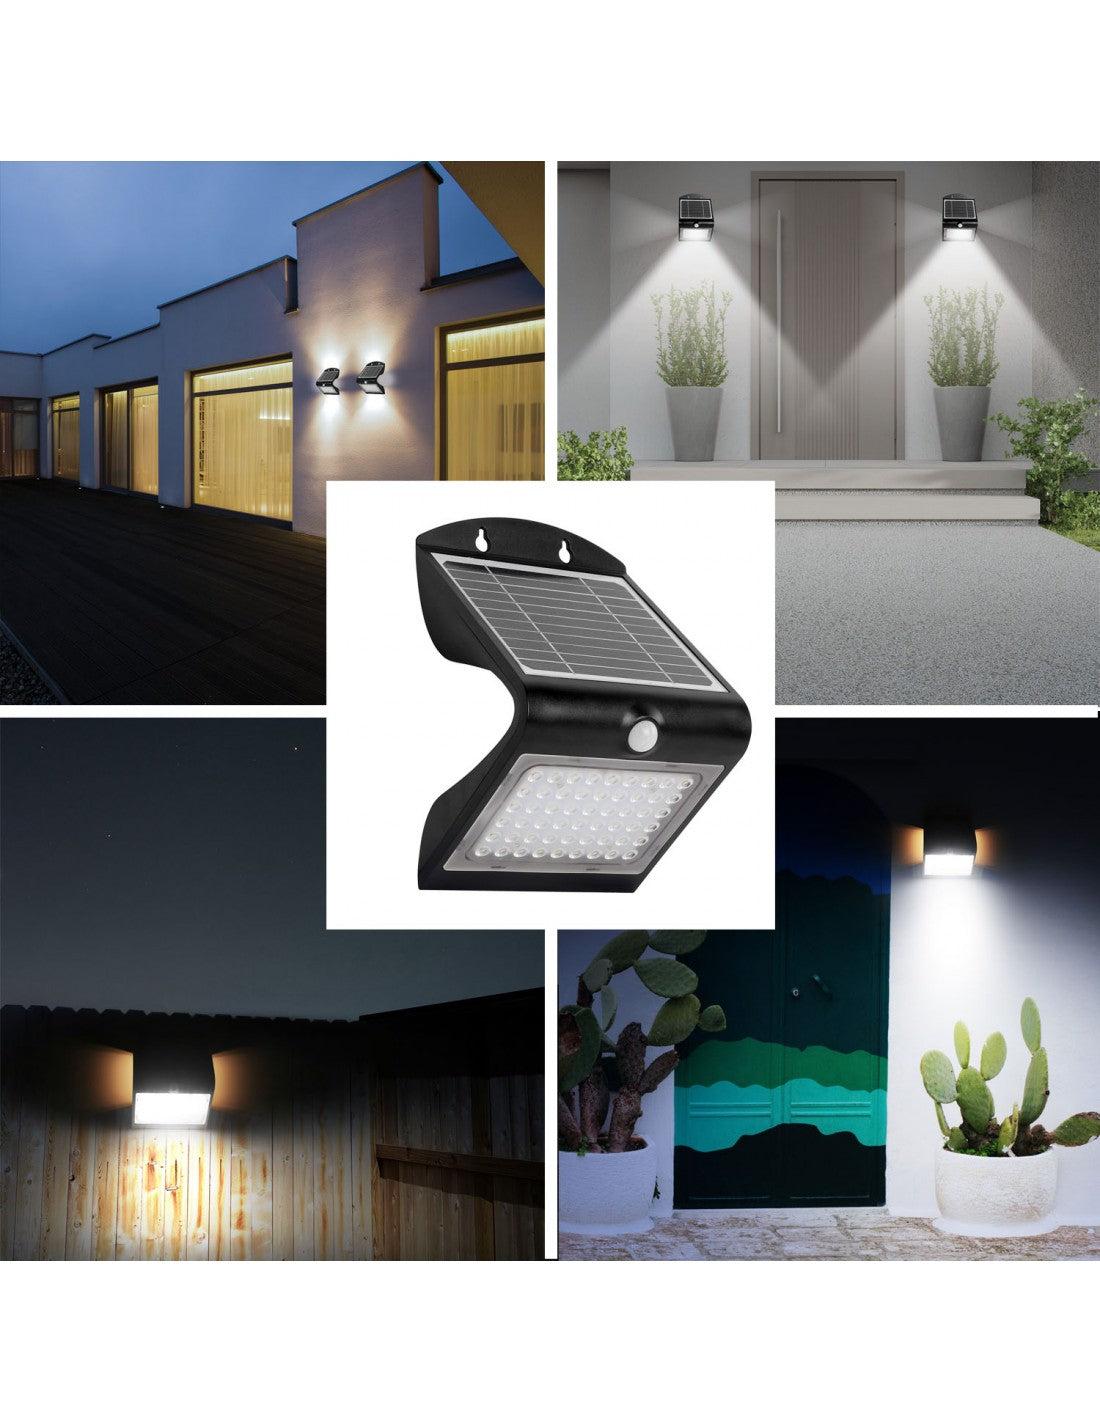 COLOMBA: 4W (500lm) solar-charged LED wall light with motion sensor - Velamp SL237